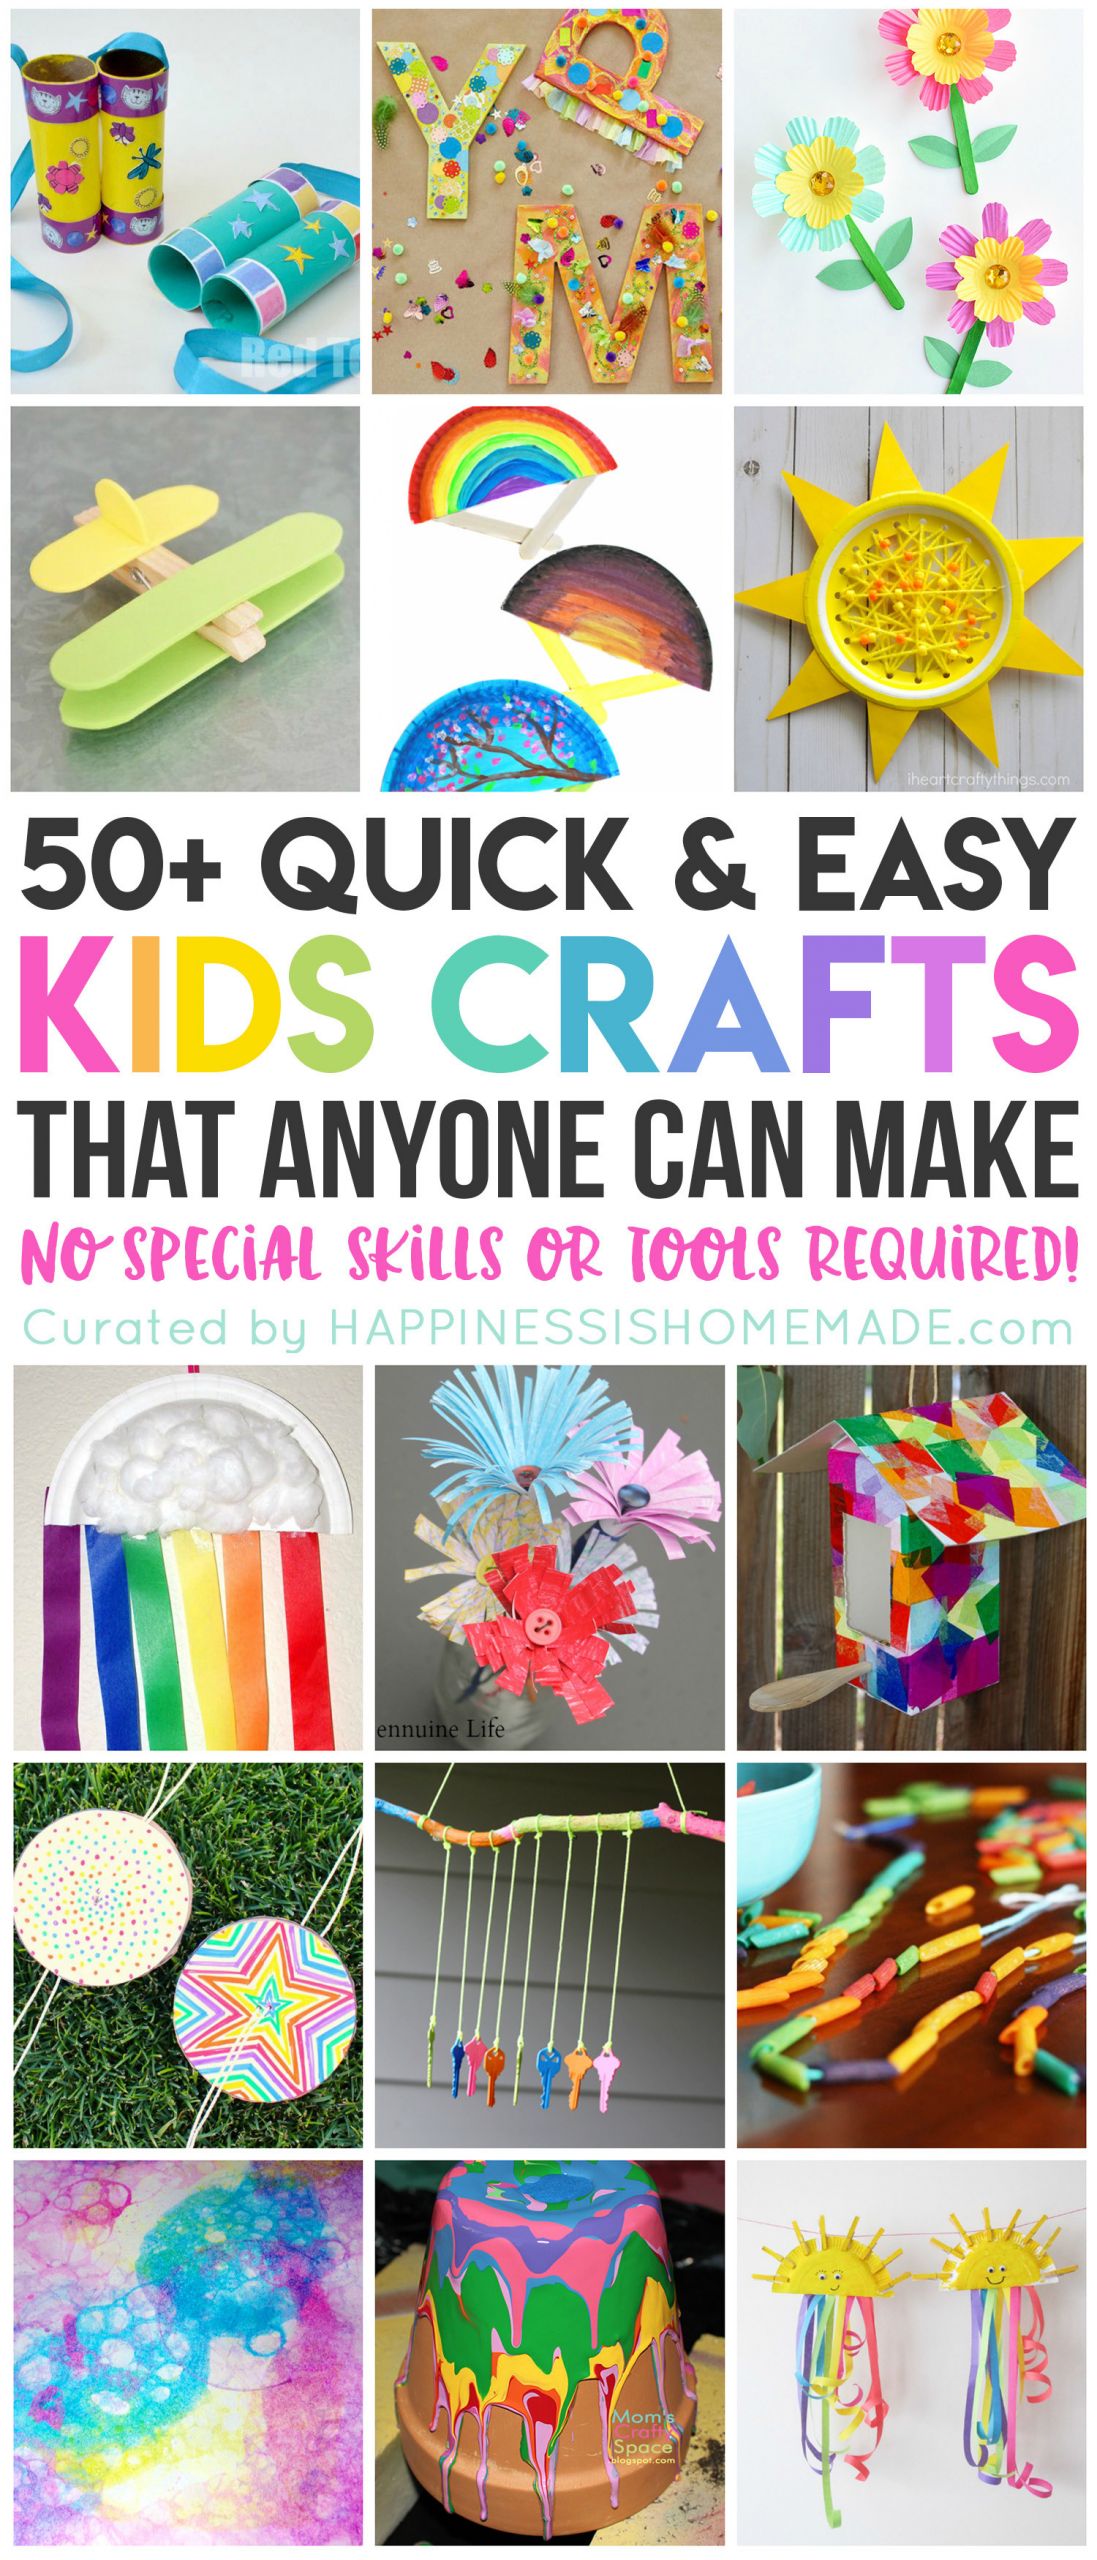 Homemade Crafts For Toddlers
 50 Quick & Easy Kids Crafts that ANYONE Can Make